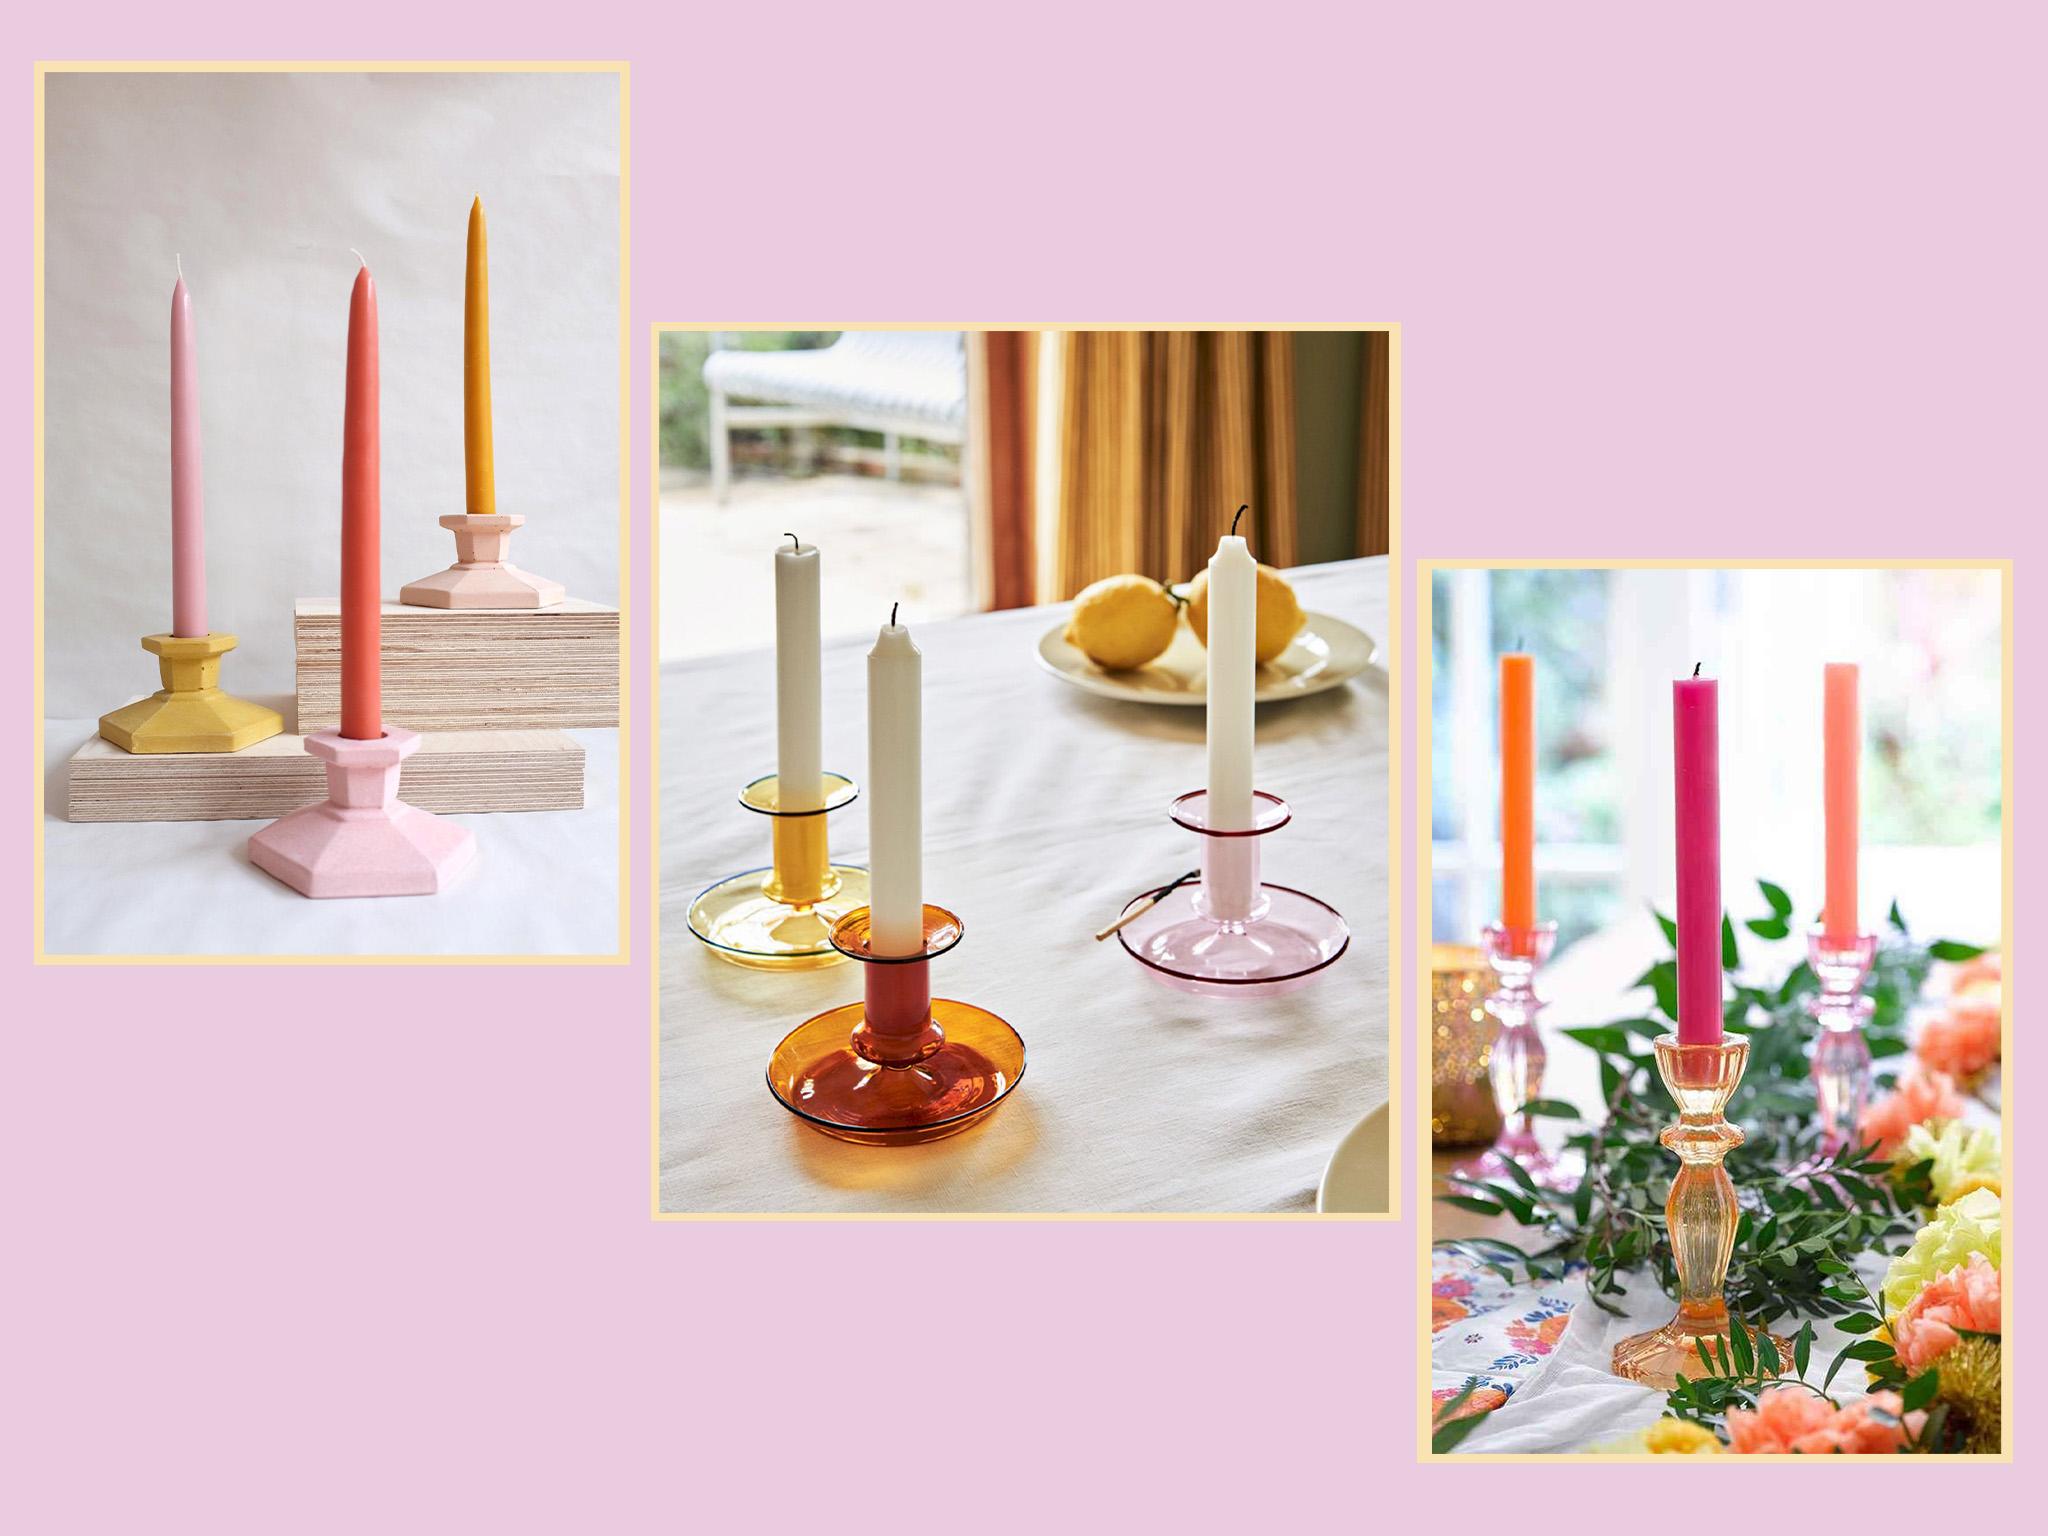 Dress up your mantelpieces and windowsills with a colourful candlestick holder